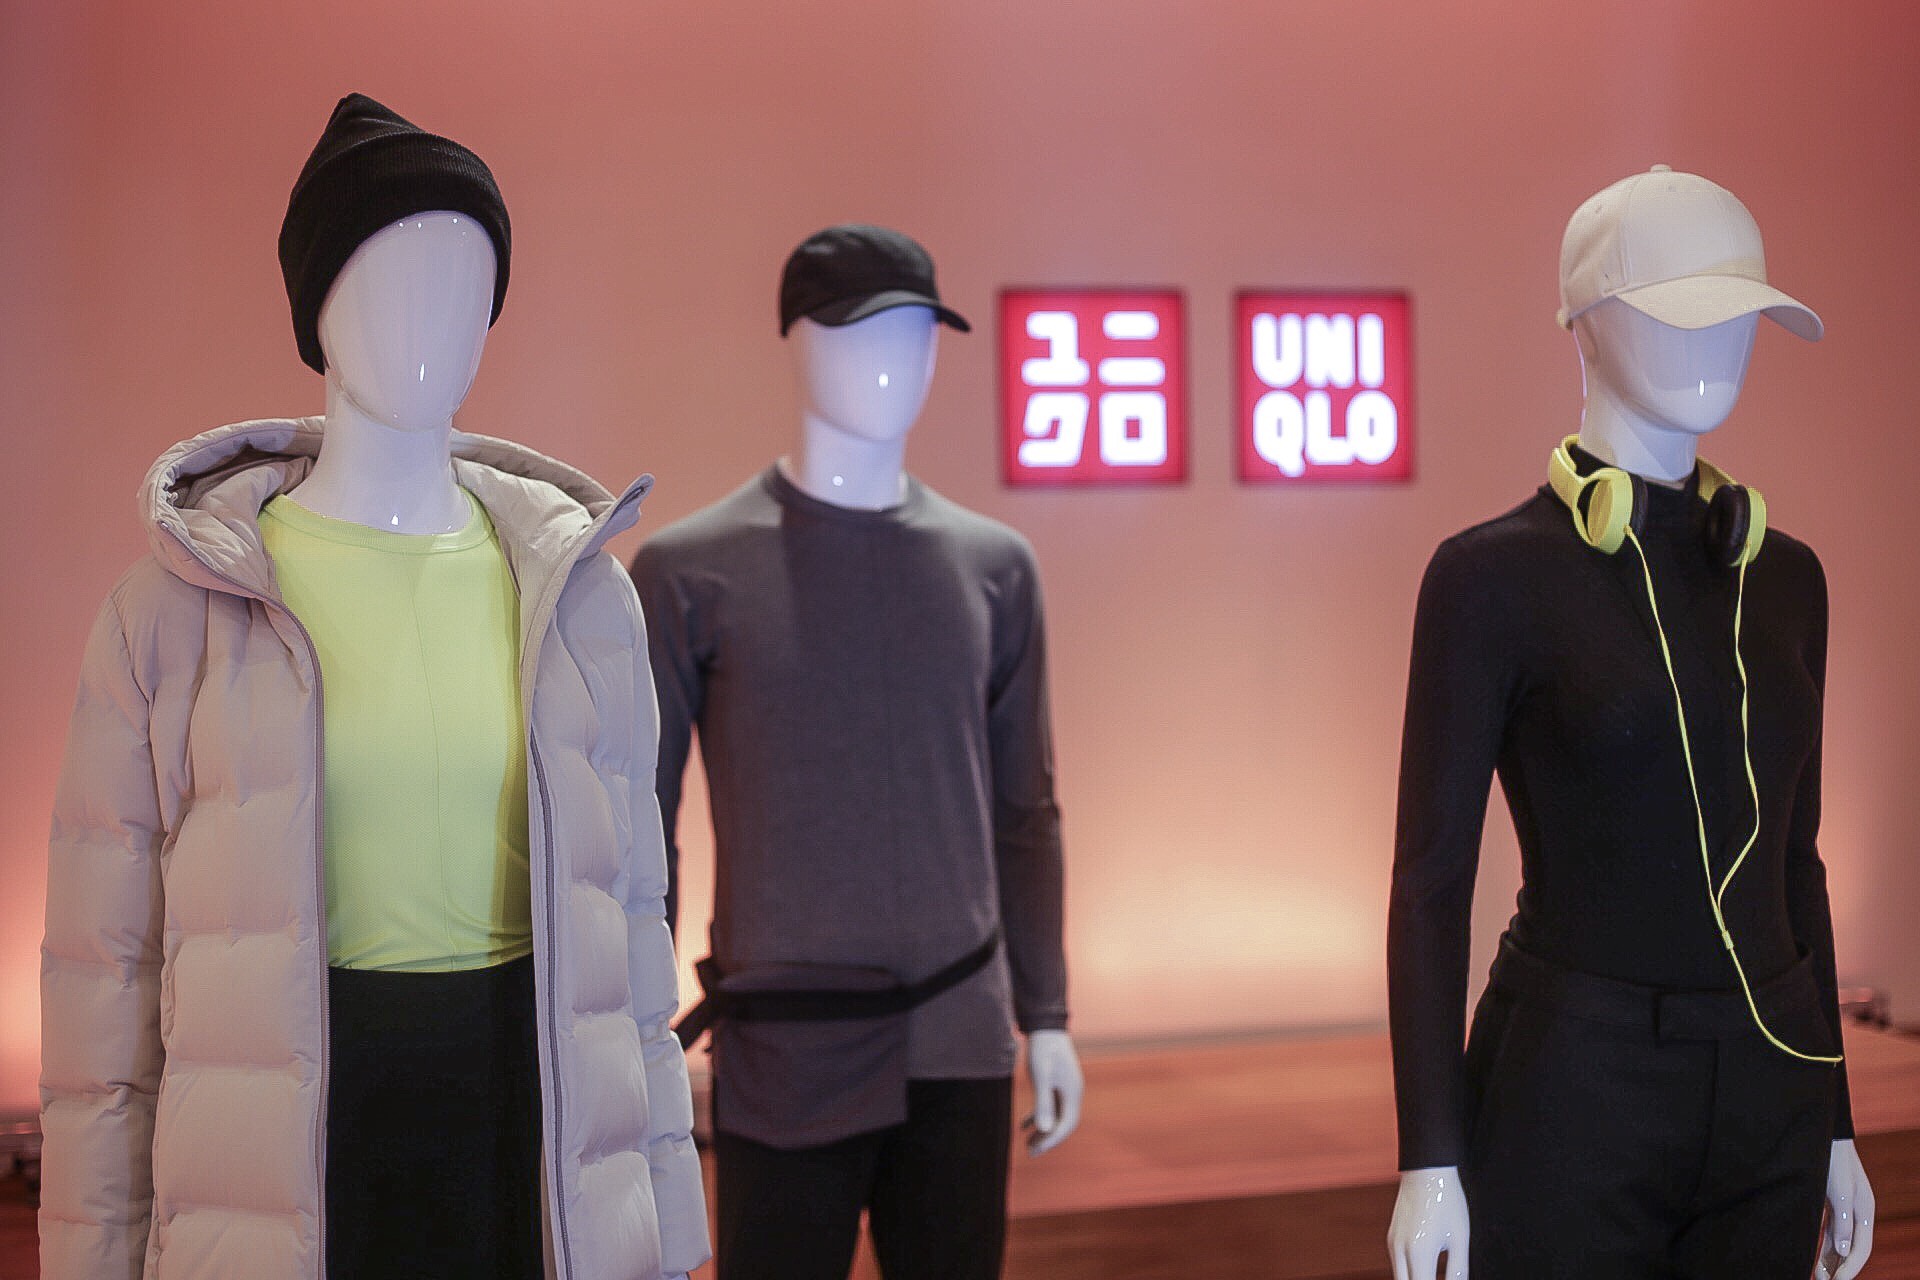 UNIQLO X ALEXANDER WANG. The New York-based designer collaborates with the Japanese retail giant on an innerwear line in its propietary Heattech fabric. Photo by Paolo Abad/Rappler 